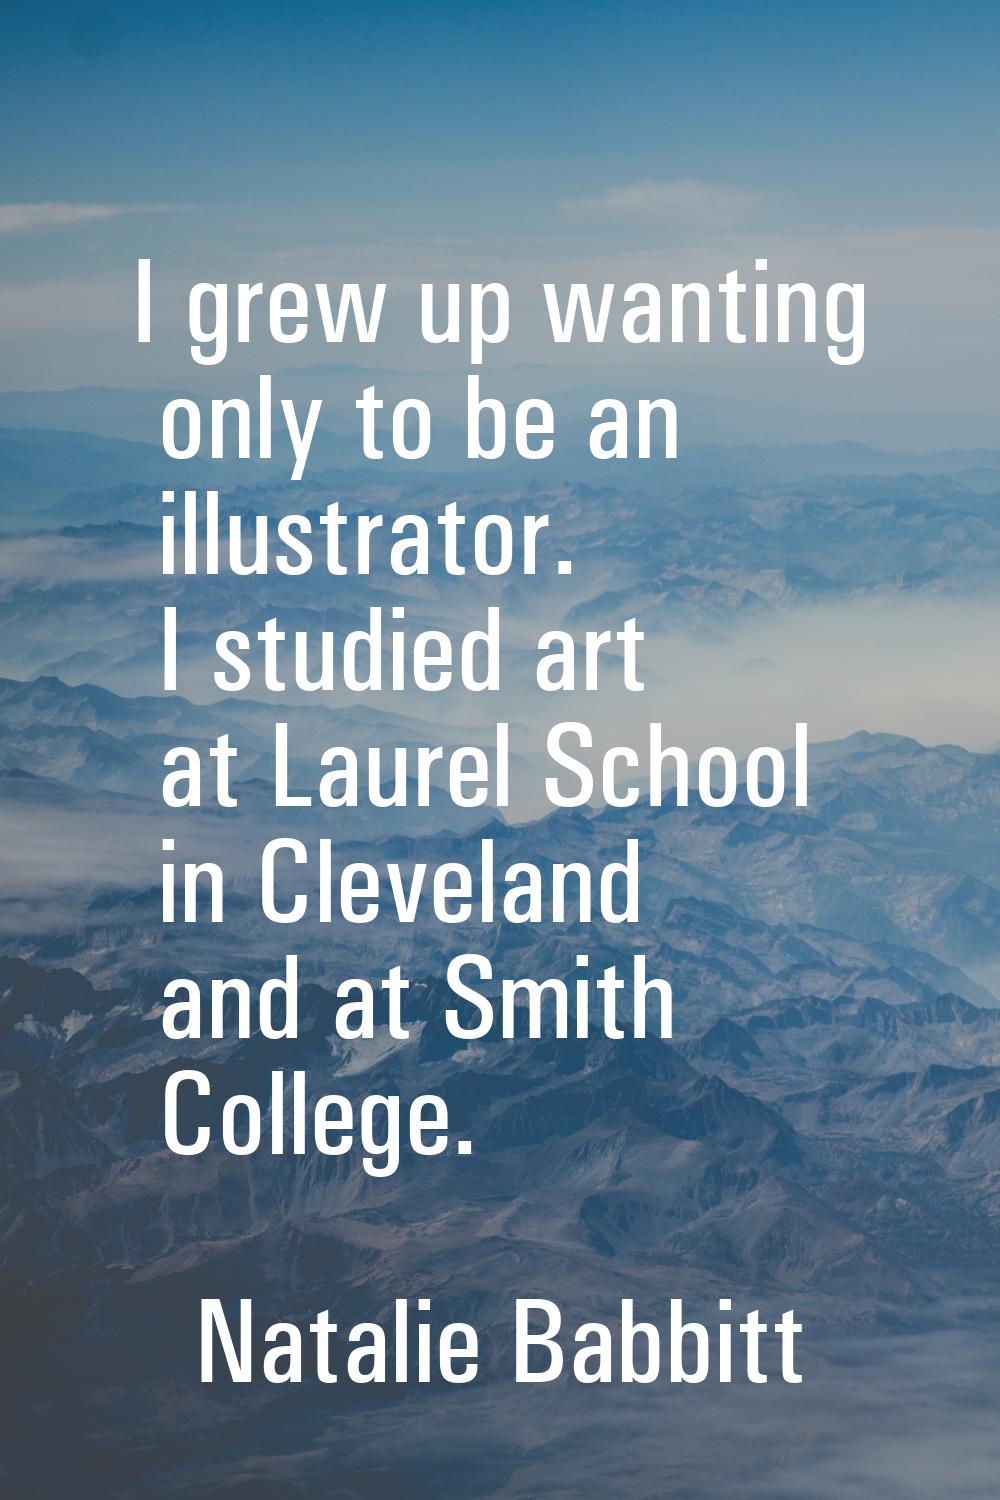 I grew up wanting only to be an illustrator. I studied art at Laurel School in Cleveland and at Smi